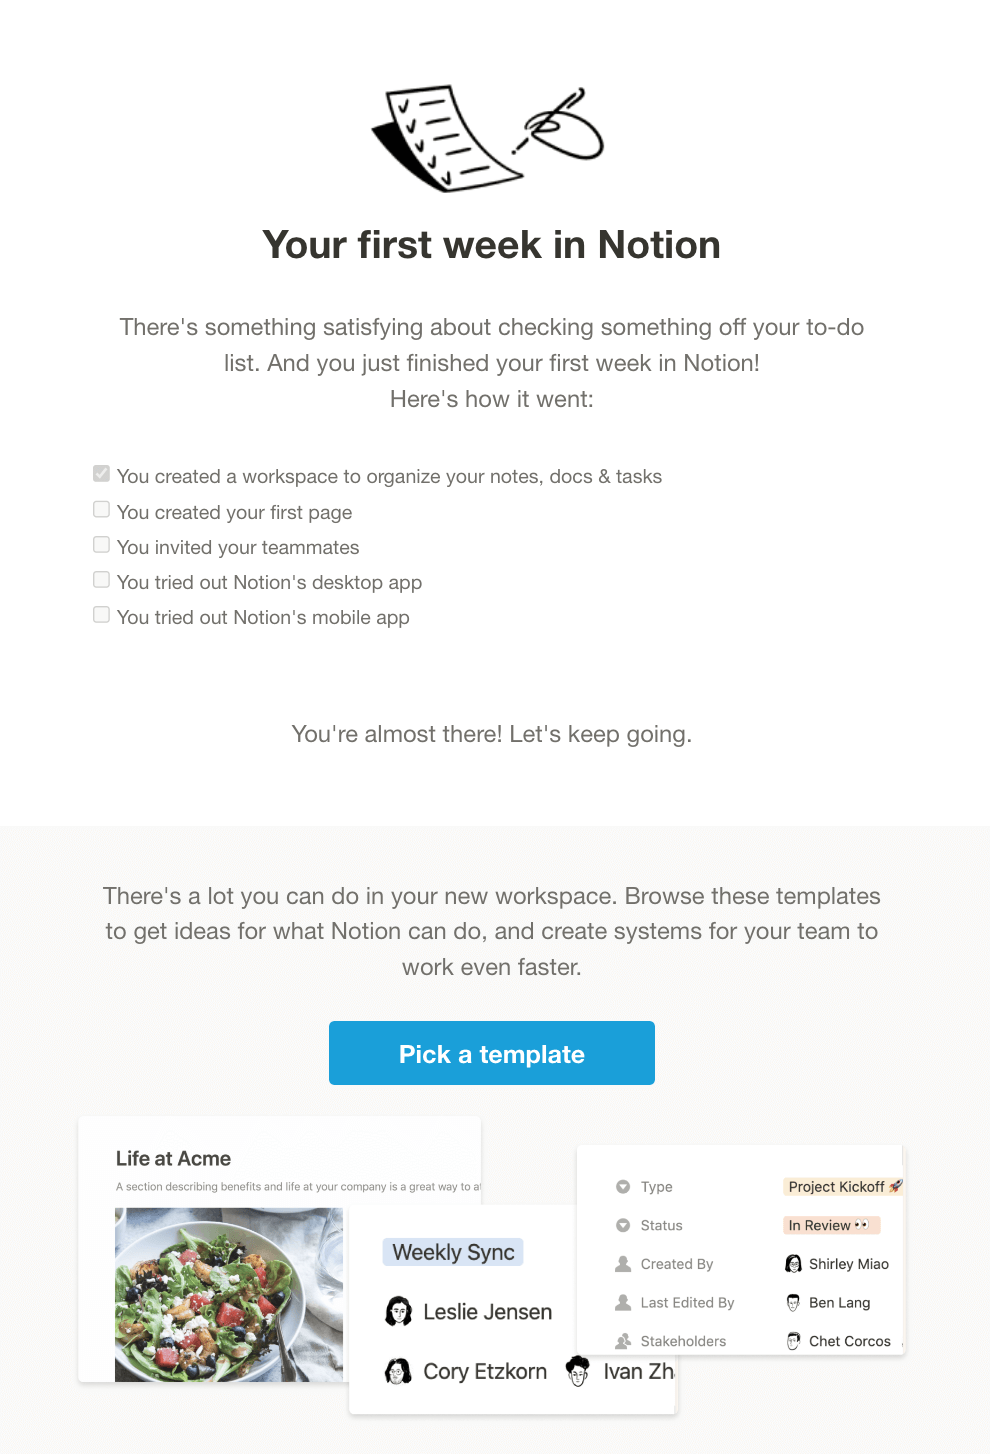 B2C SaaS Email Marketing: Screenshot of Notion's email for onboarding